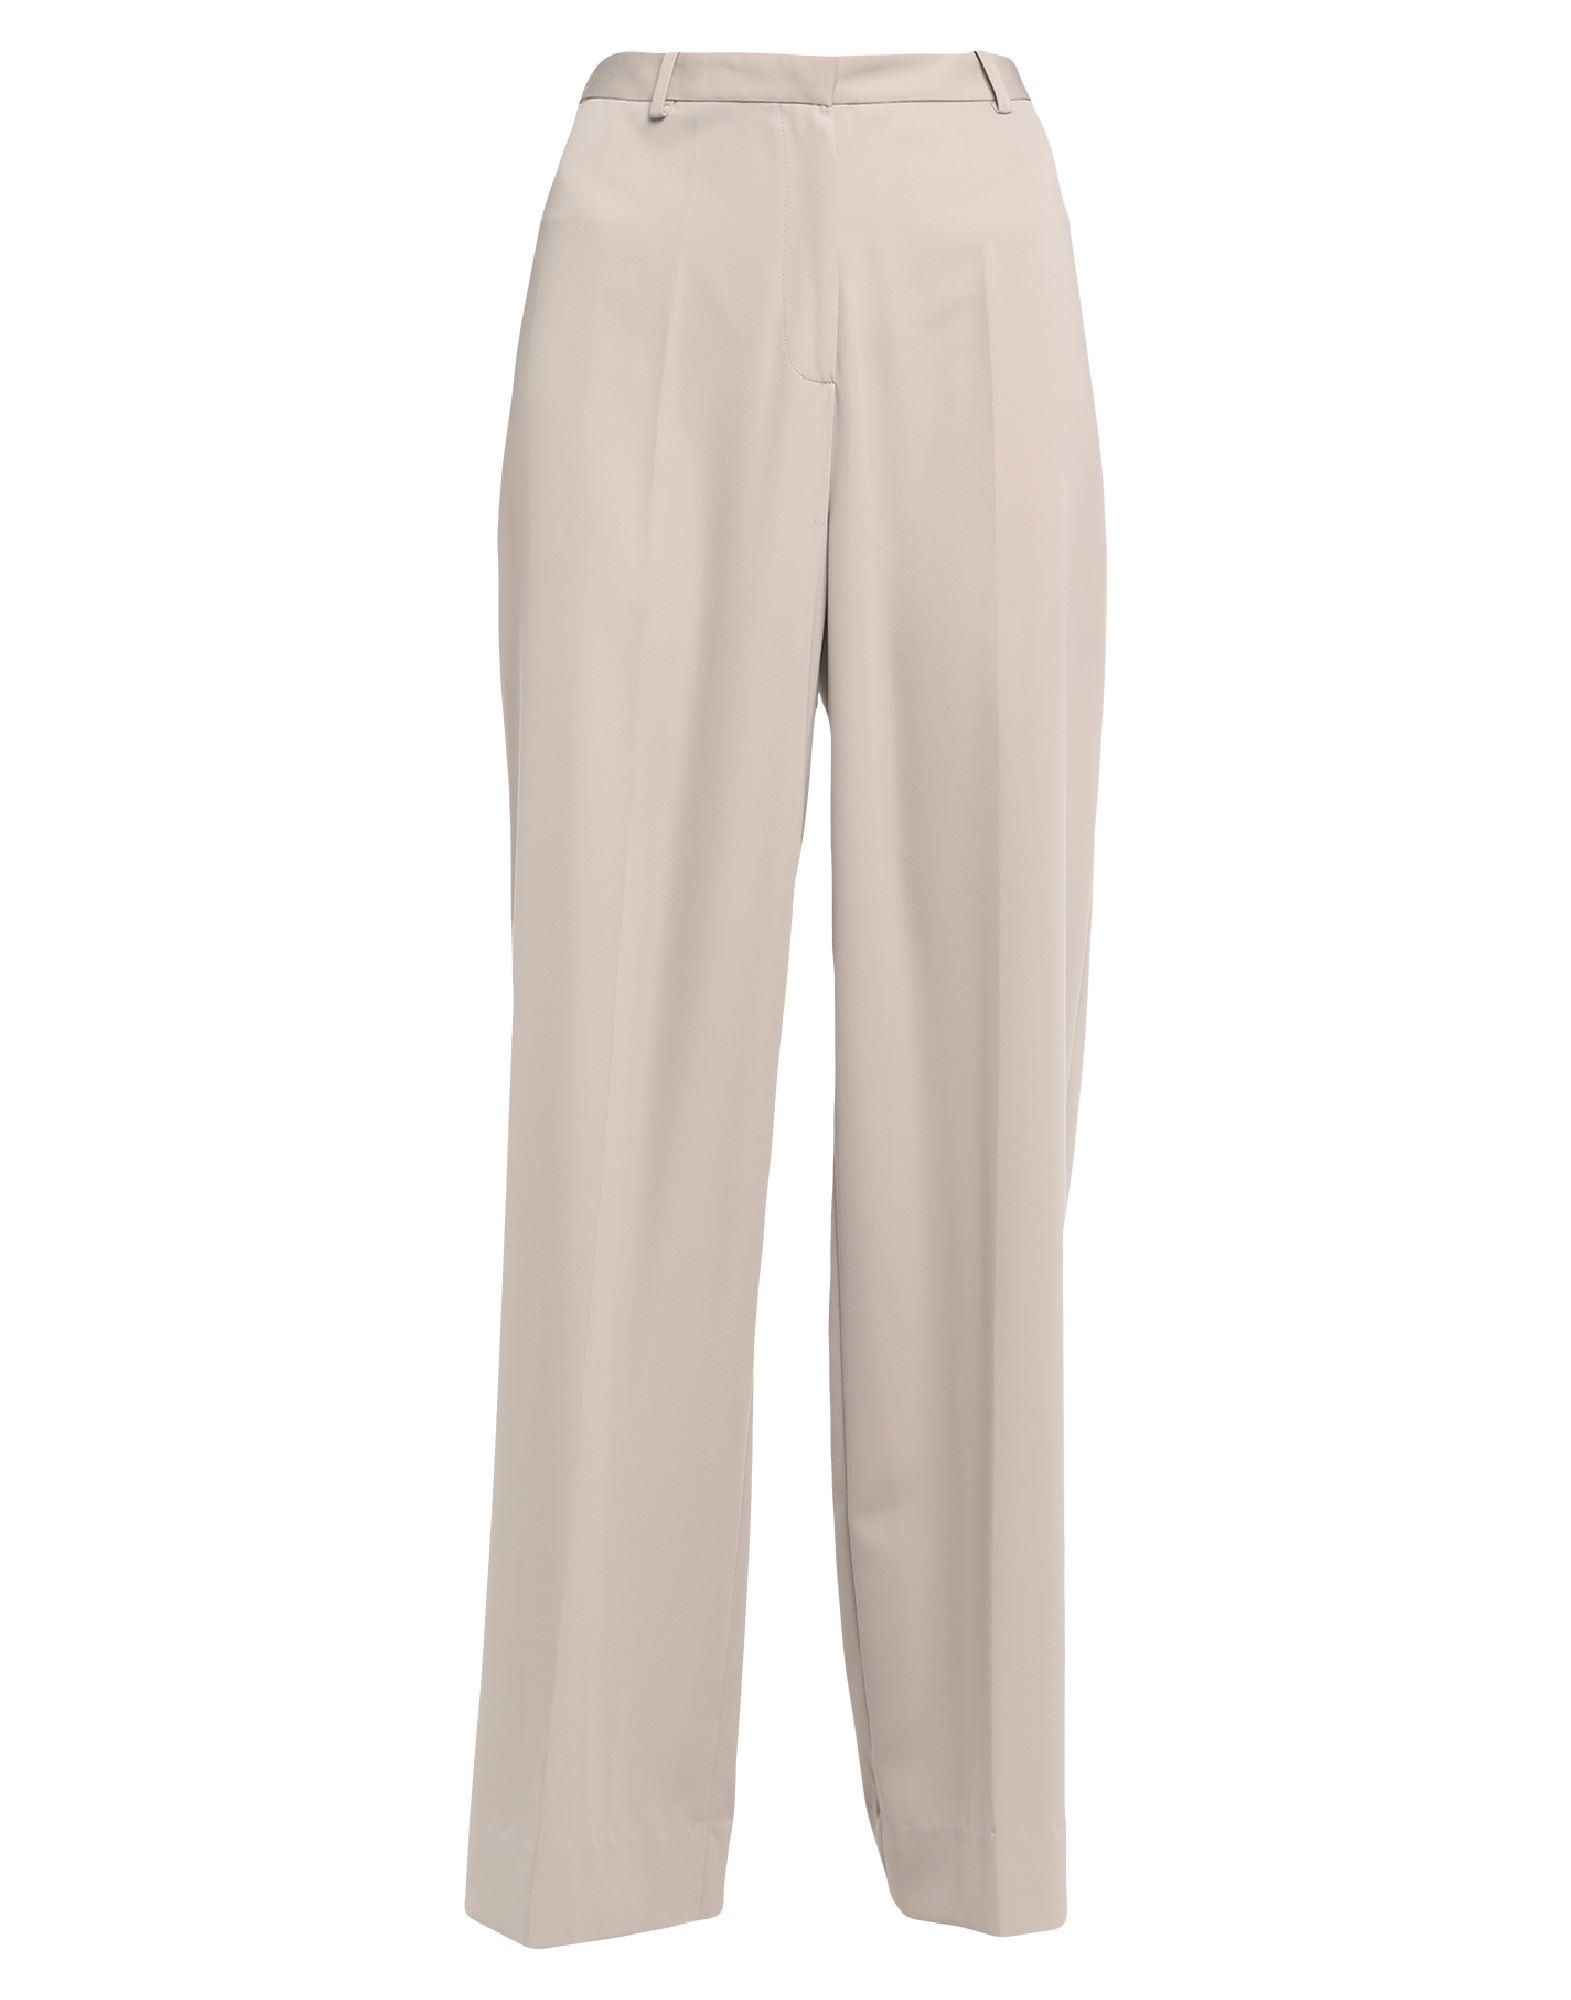 HOTEL PARTICULIER HOTEL PARTICULIER WOMAN PANTS BEIGE SIZE 8 POLYESTER,13579013TV 5